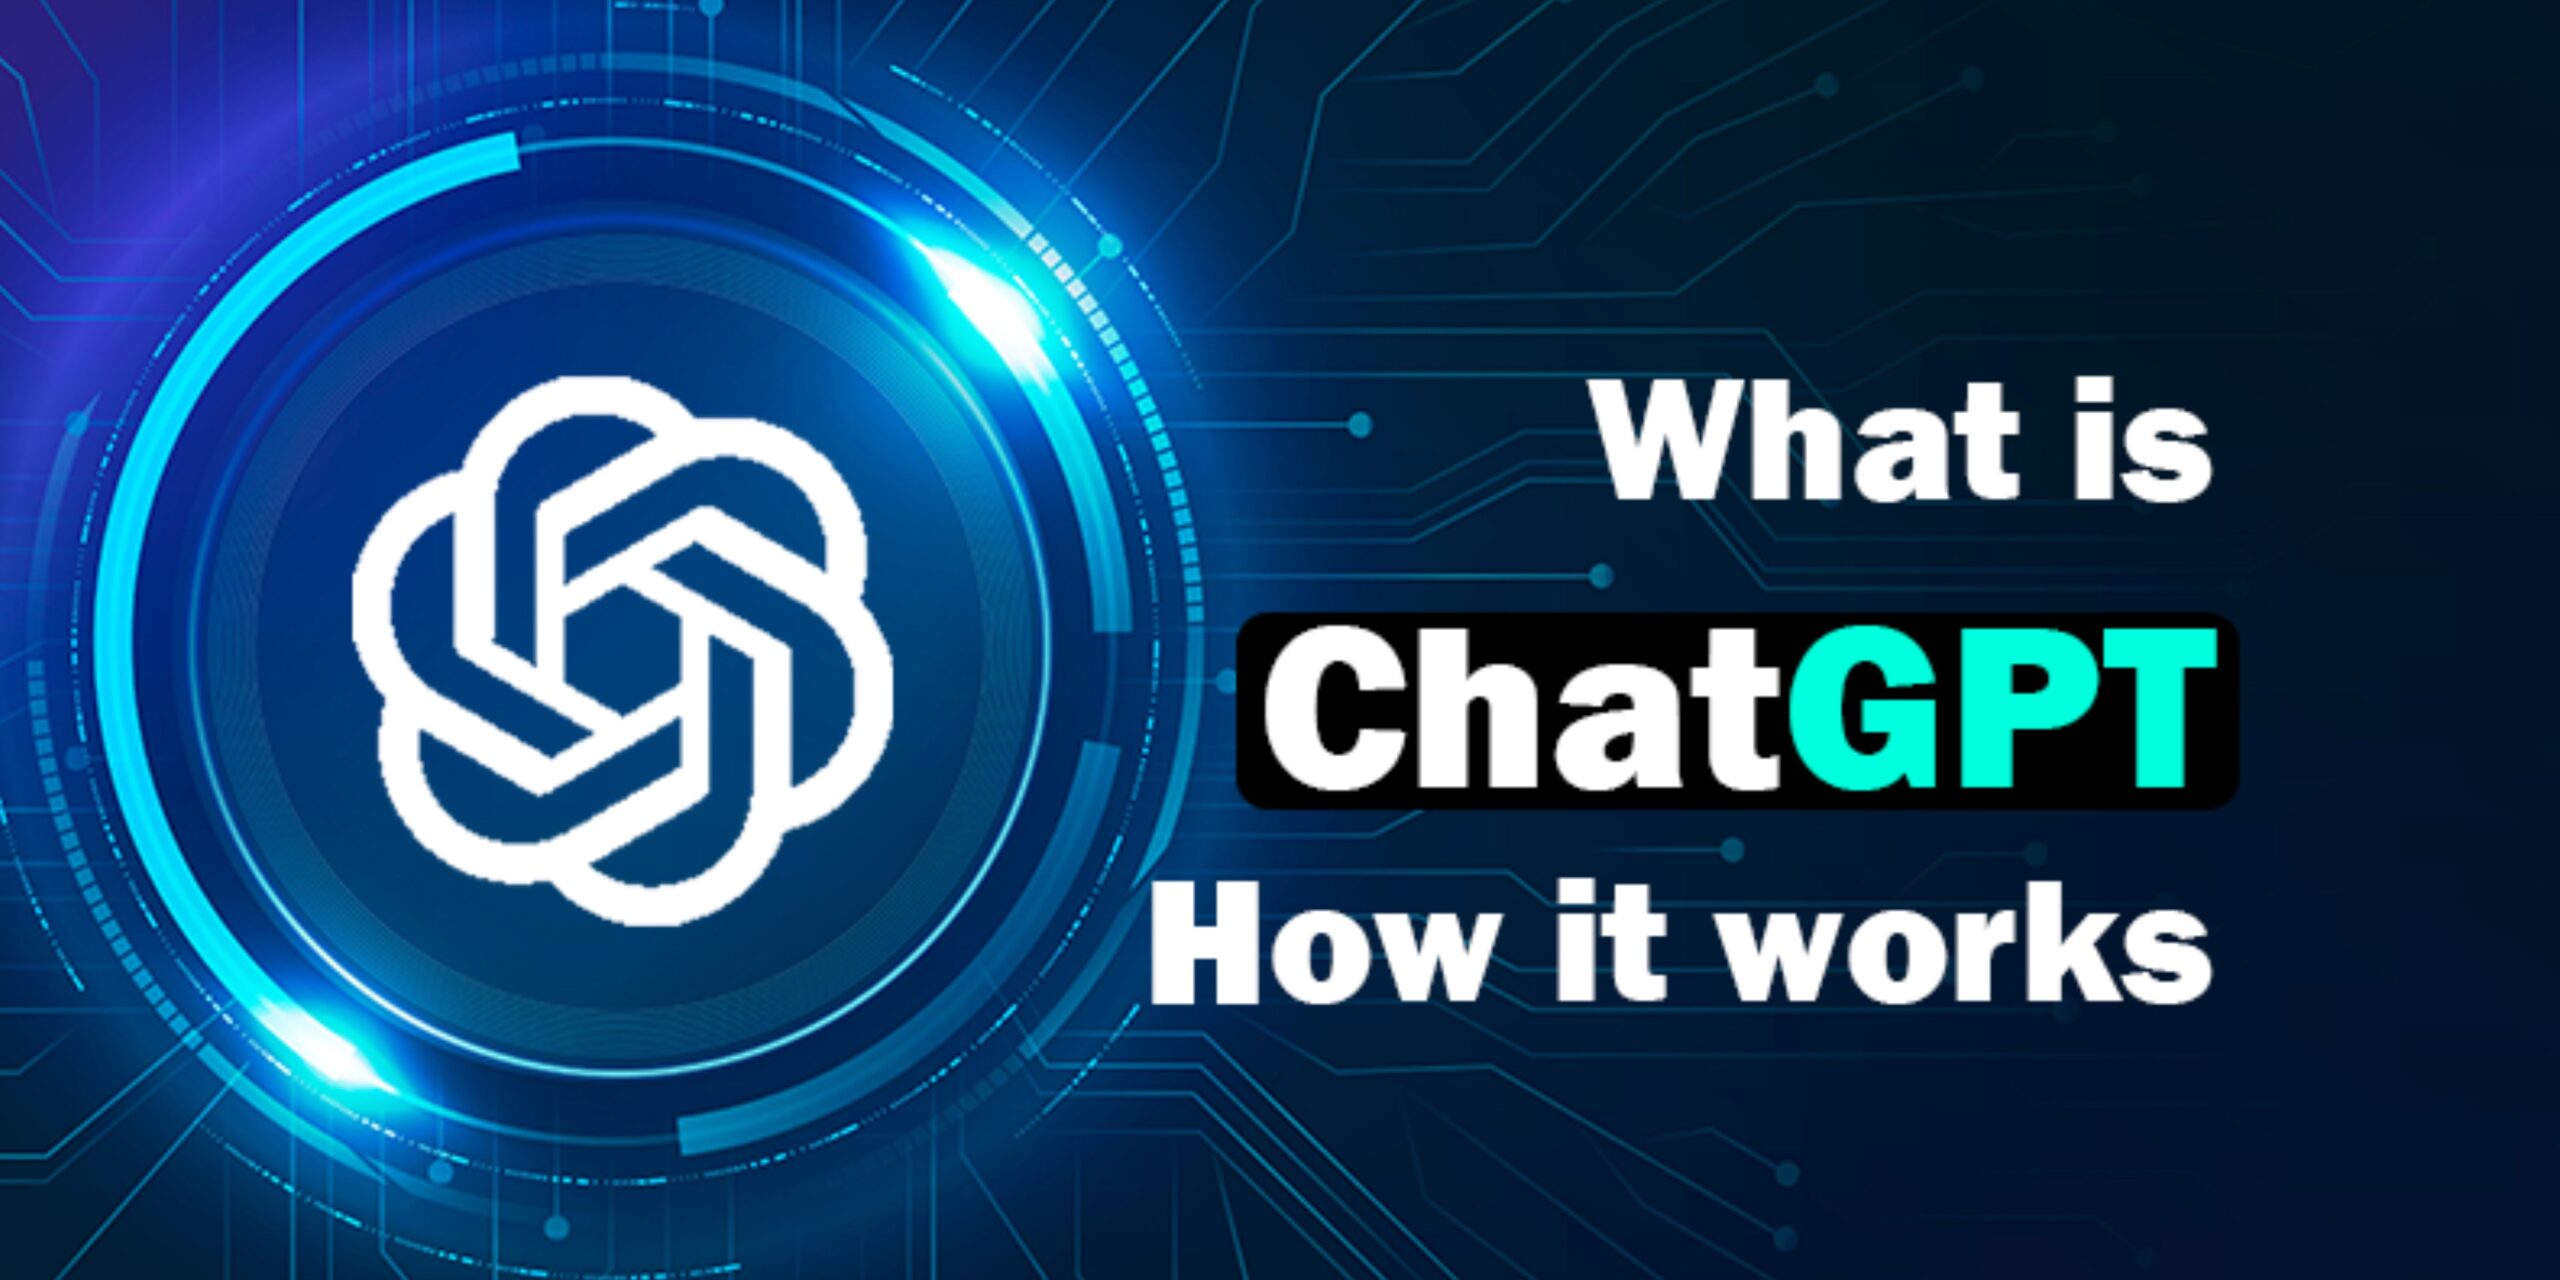 What is chatgpt?